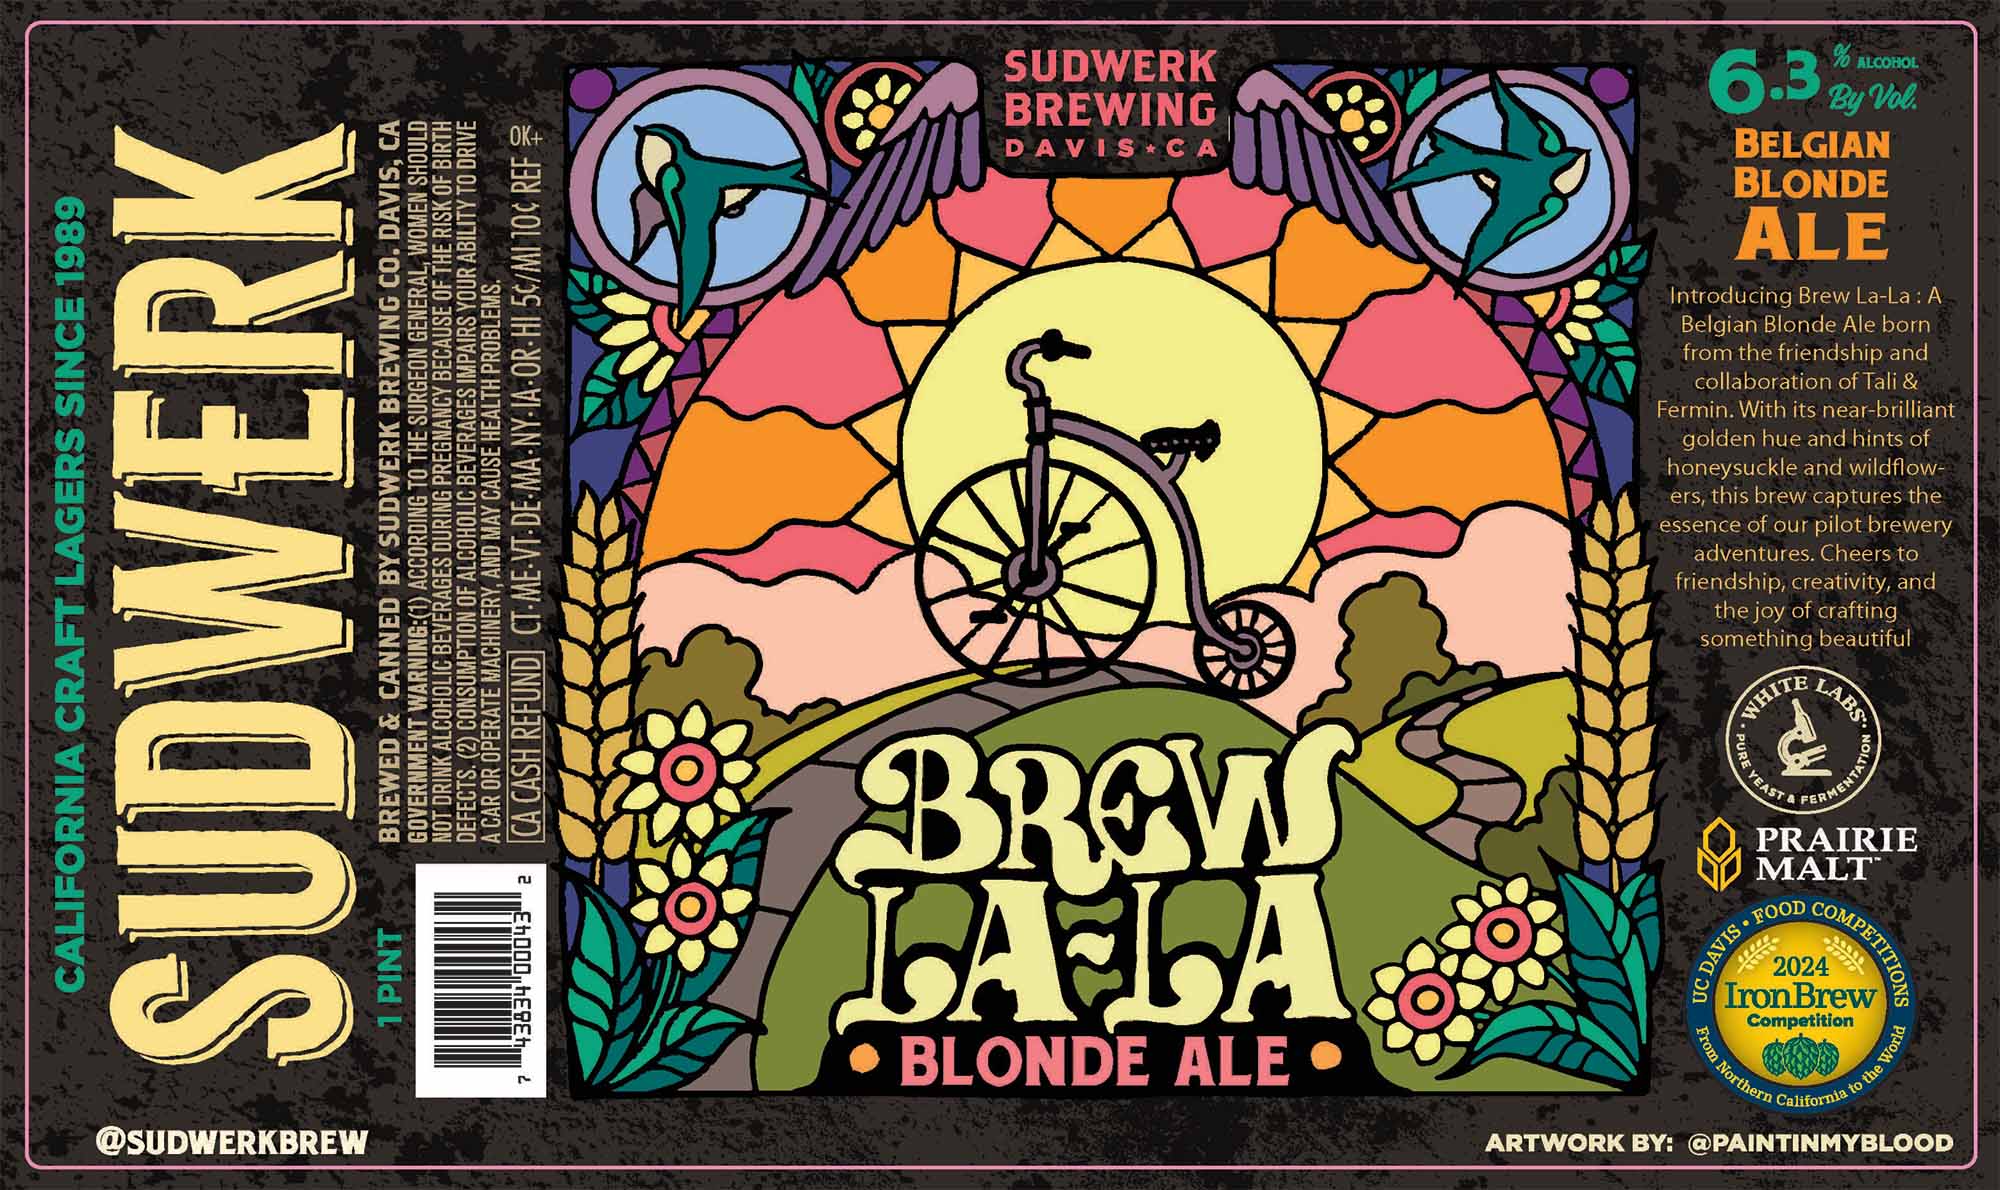 A colorful label for Sudwerk Brewing's "Brew La-La Belgian Blonde Ale" with Art Nouveau-style illustration featuring flowers, wheat, birds, bike. Text includes beer name, "Introducing Brew La-La...born from friendship of Tali & Fermin", brewery info, 6.3% ABV, artist credit, "PRAIRIE MALT", and "2024 Iron Brew Competition" logo